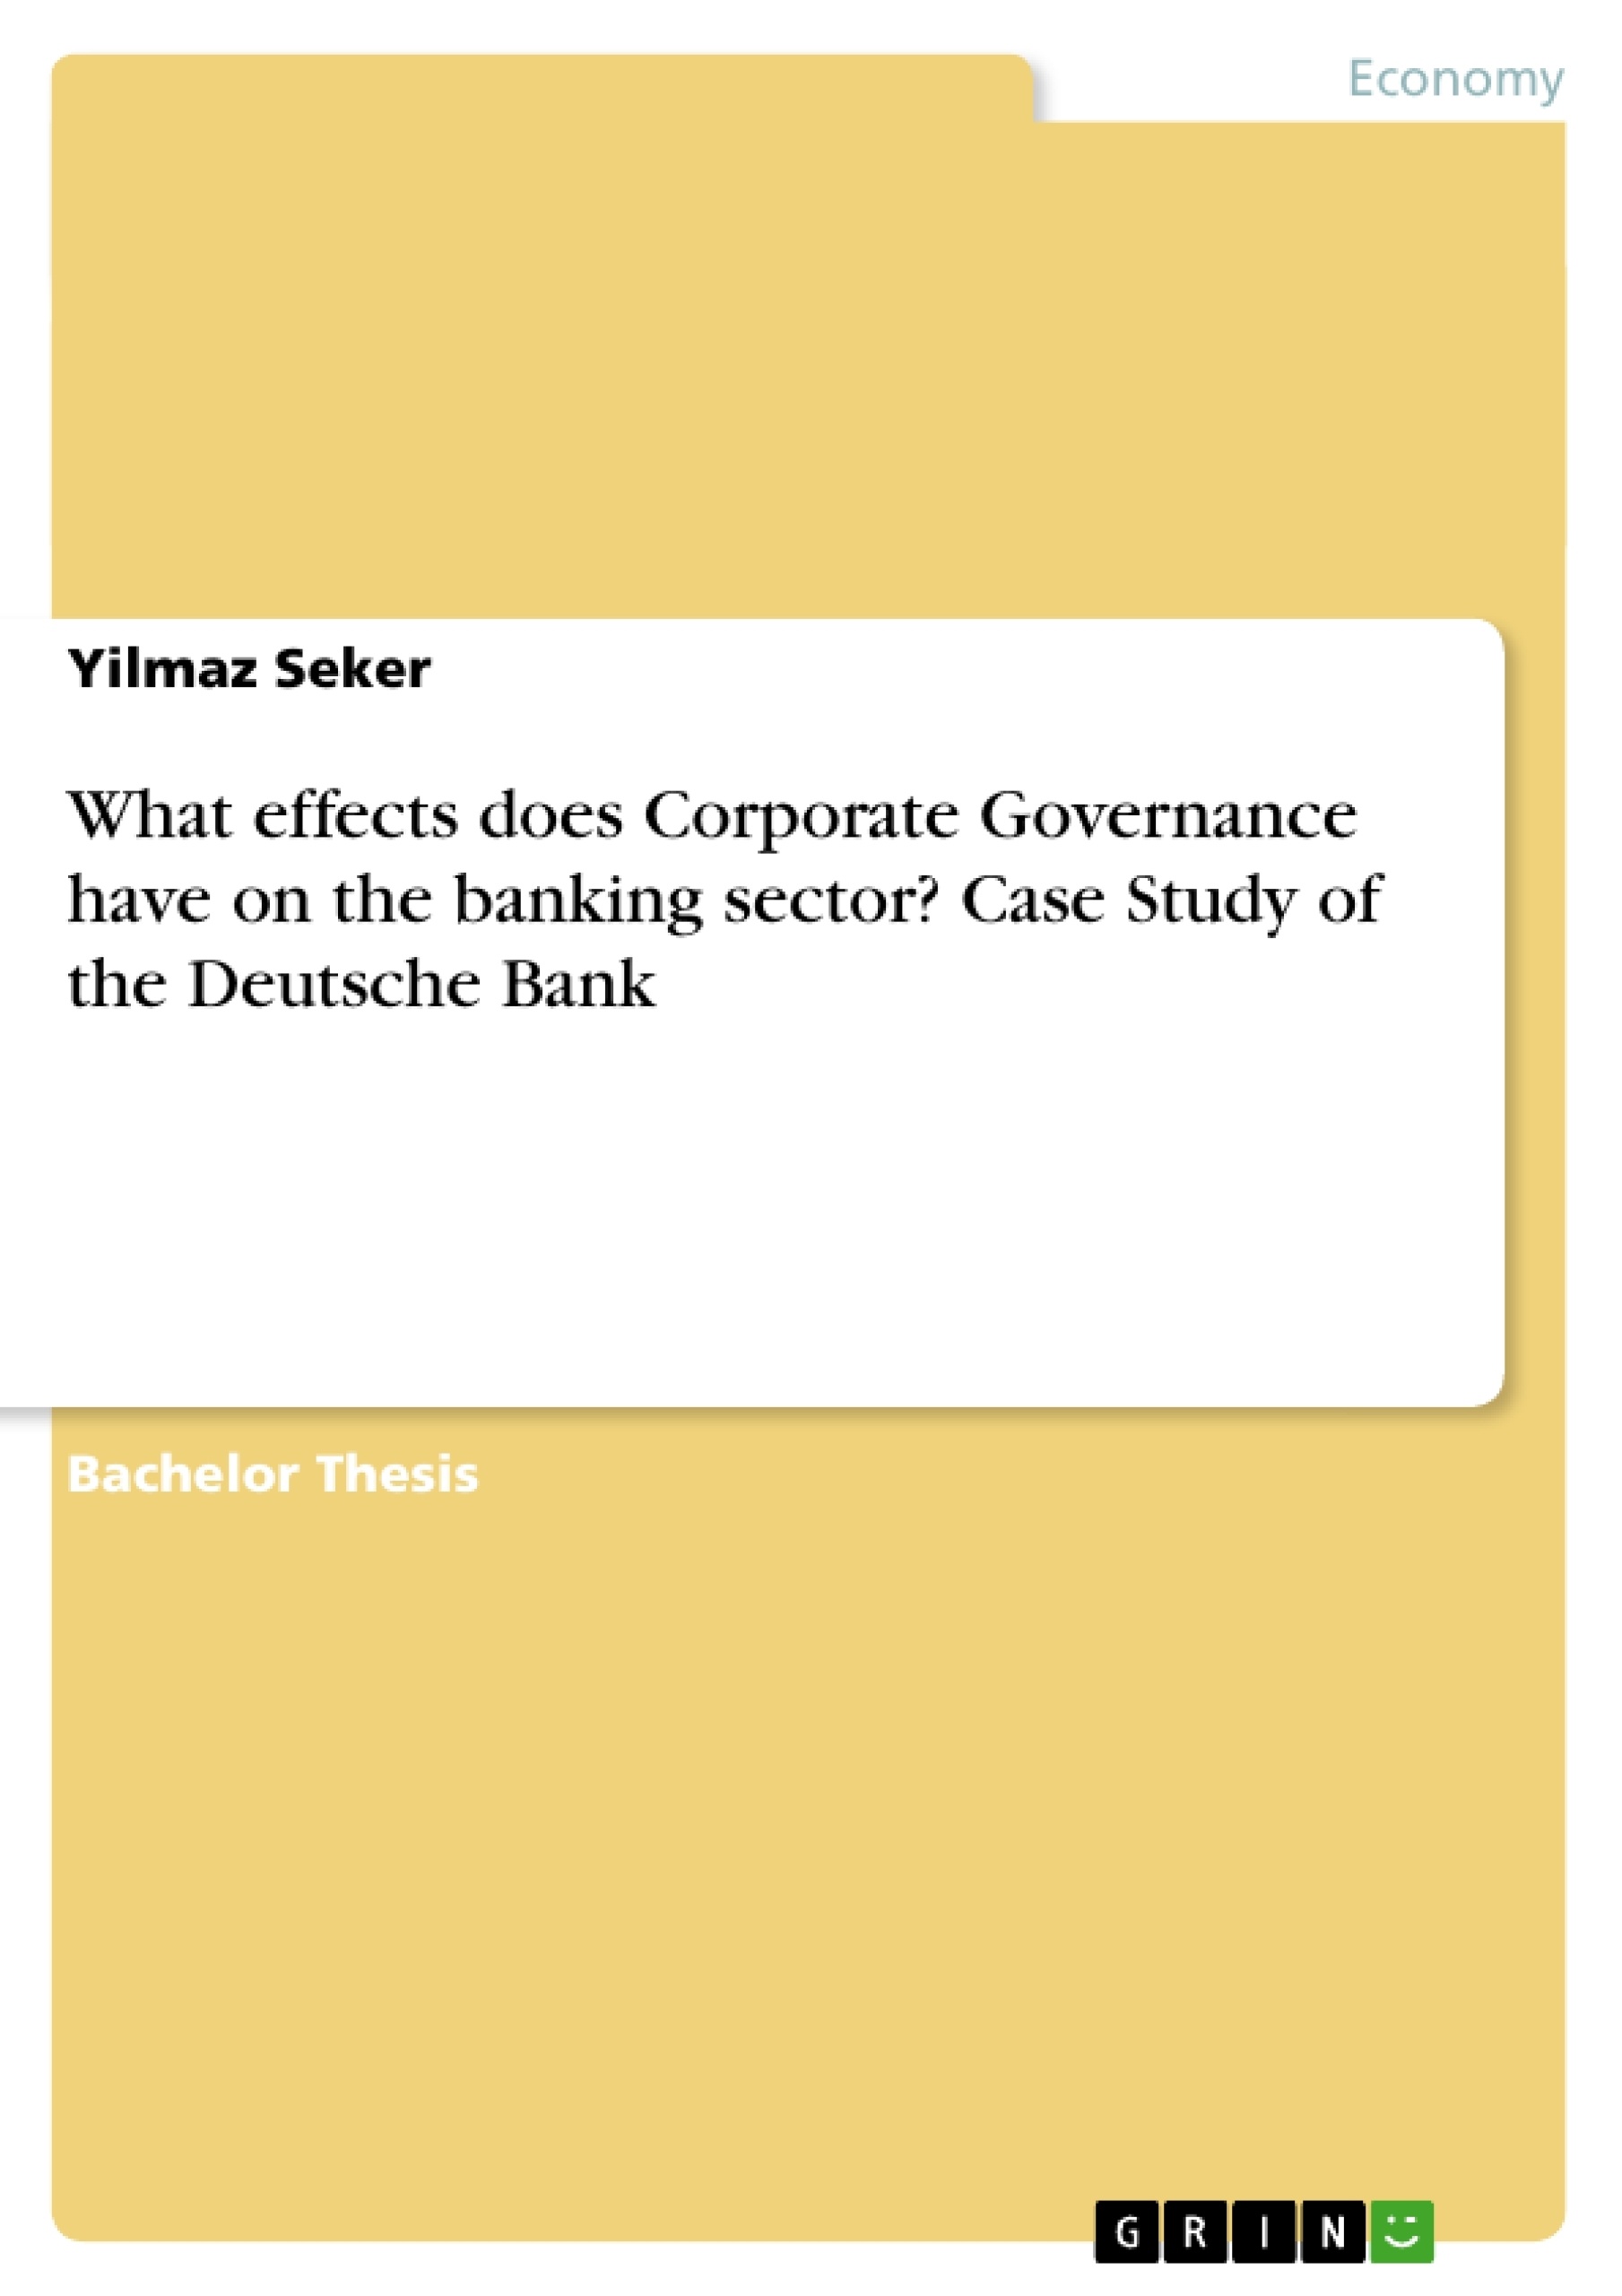 Title: What effects does Corporate Governance have on the banking sector? Case Study of the Deutsche Bank